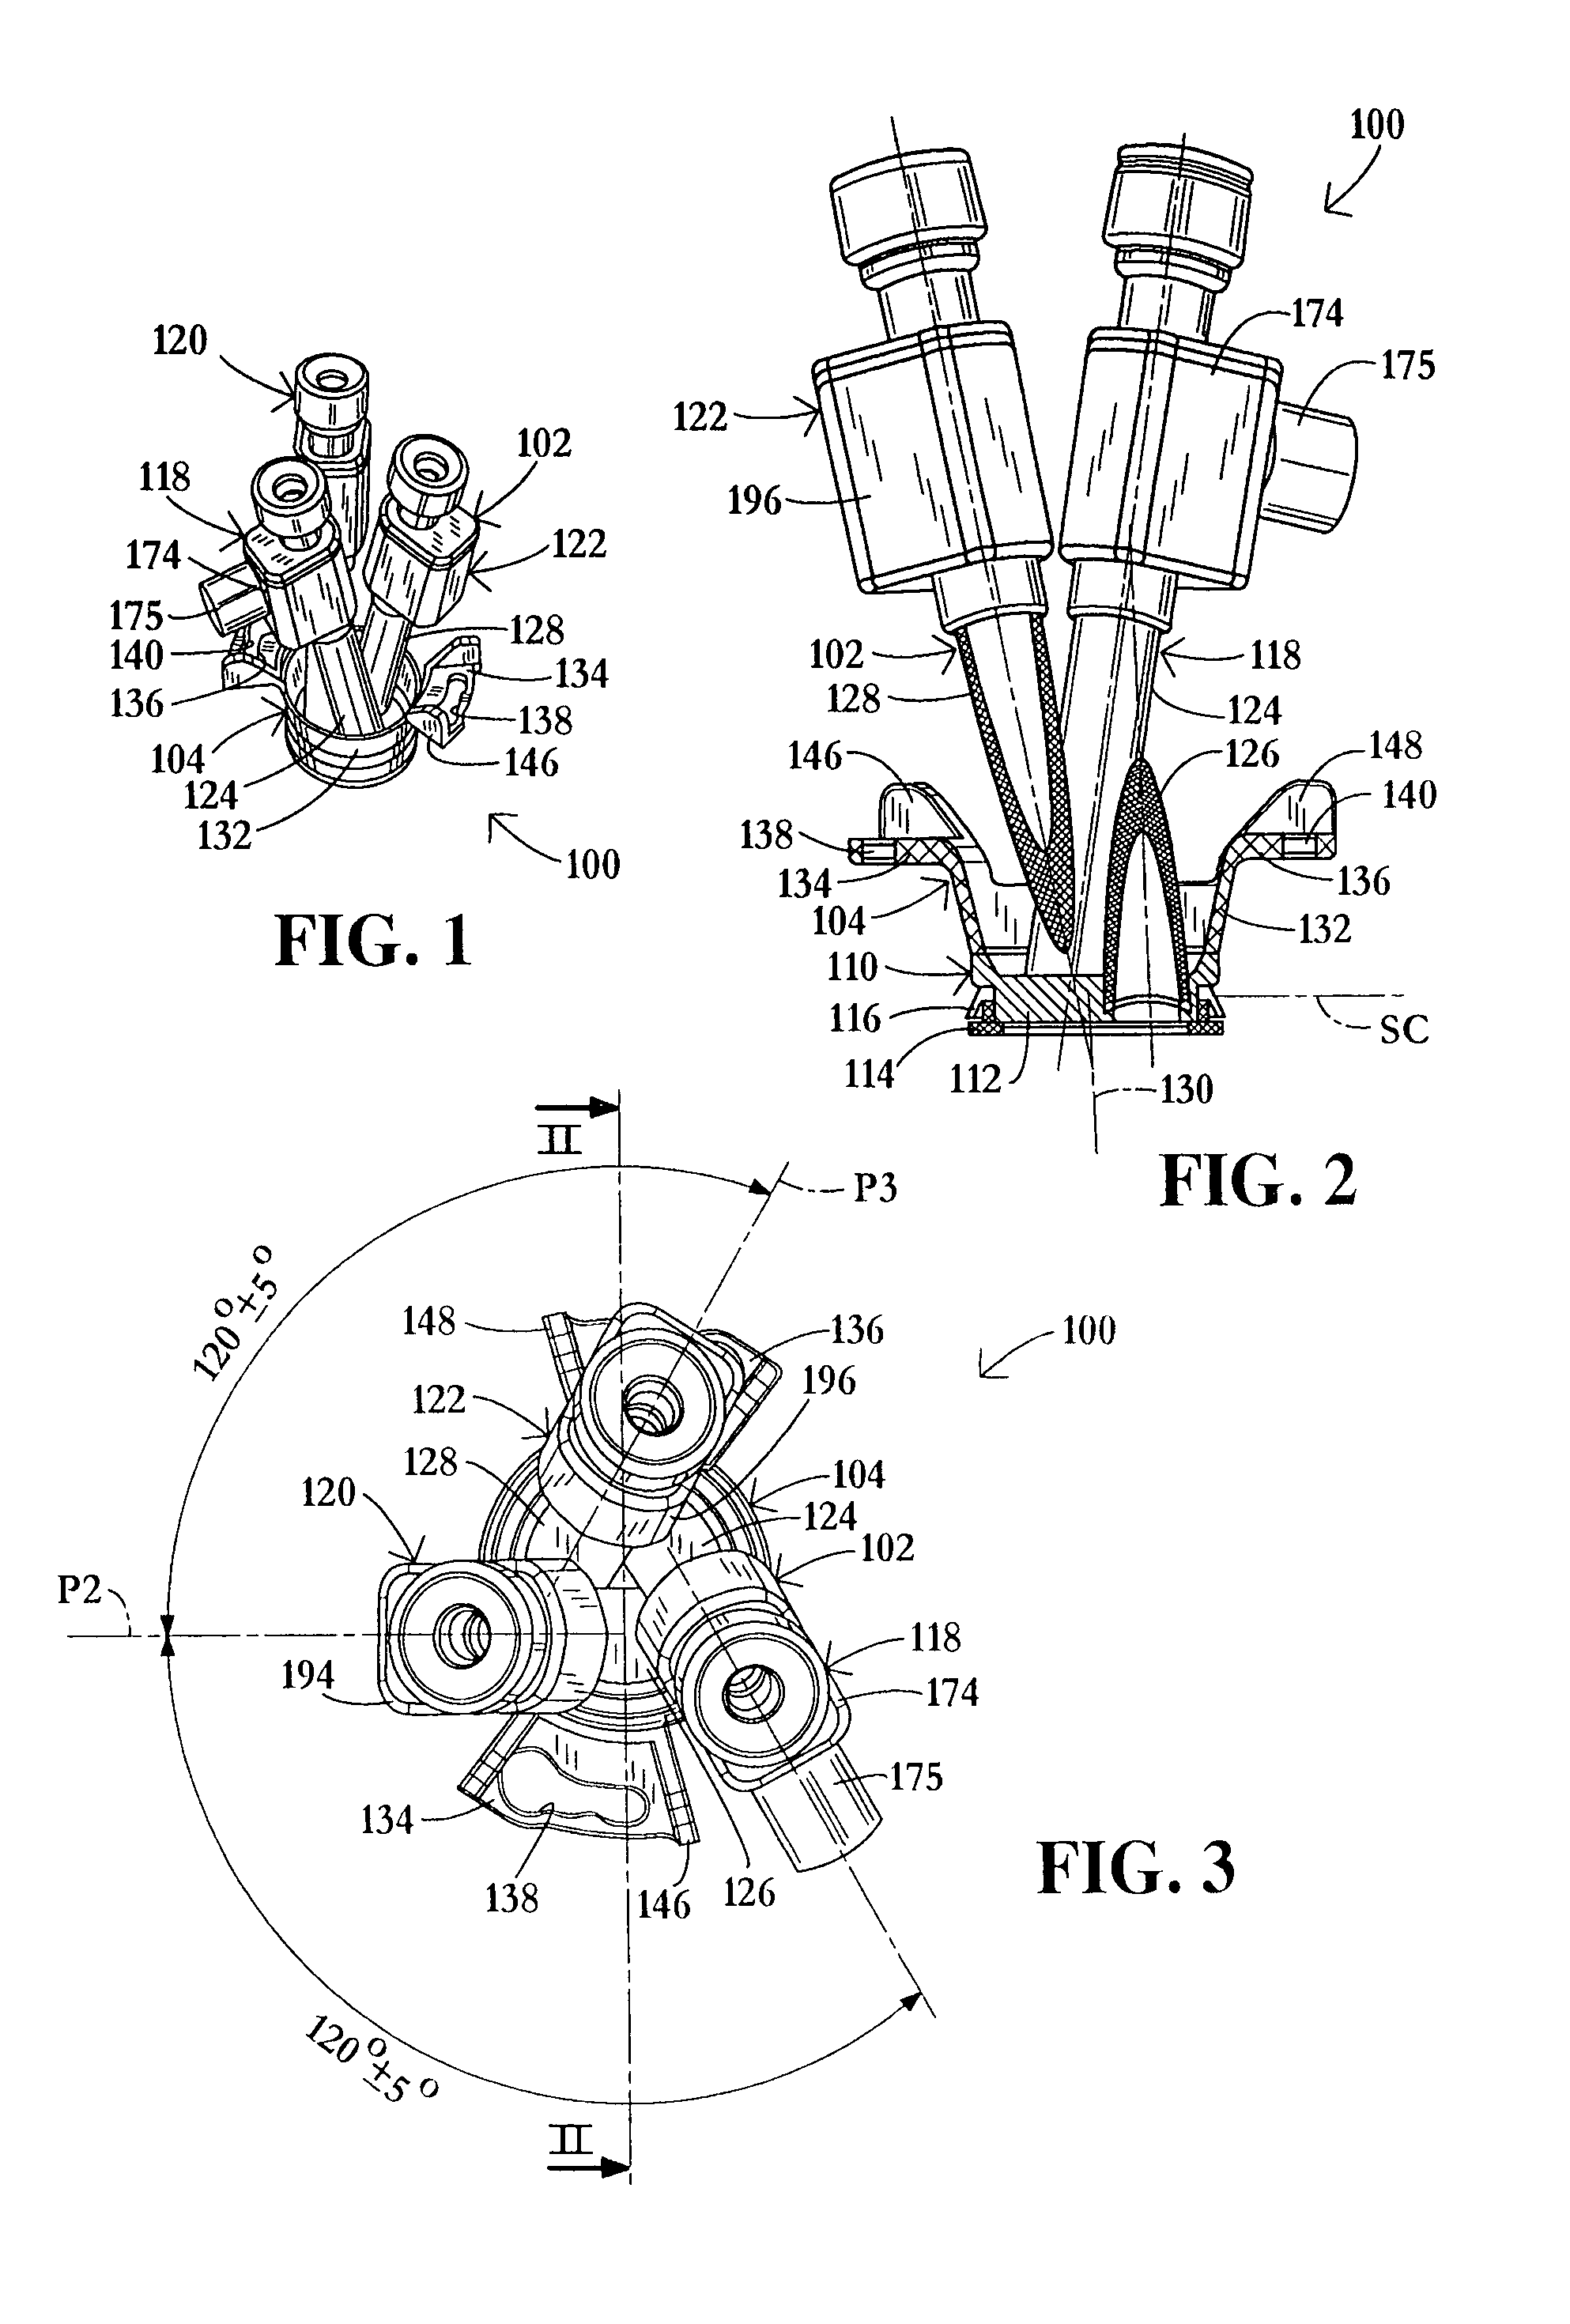 Laparoscopic instrument and cannula assembly and related surgical method